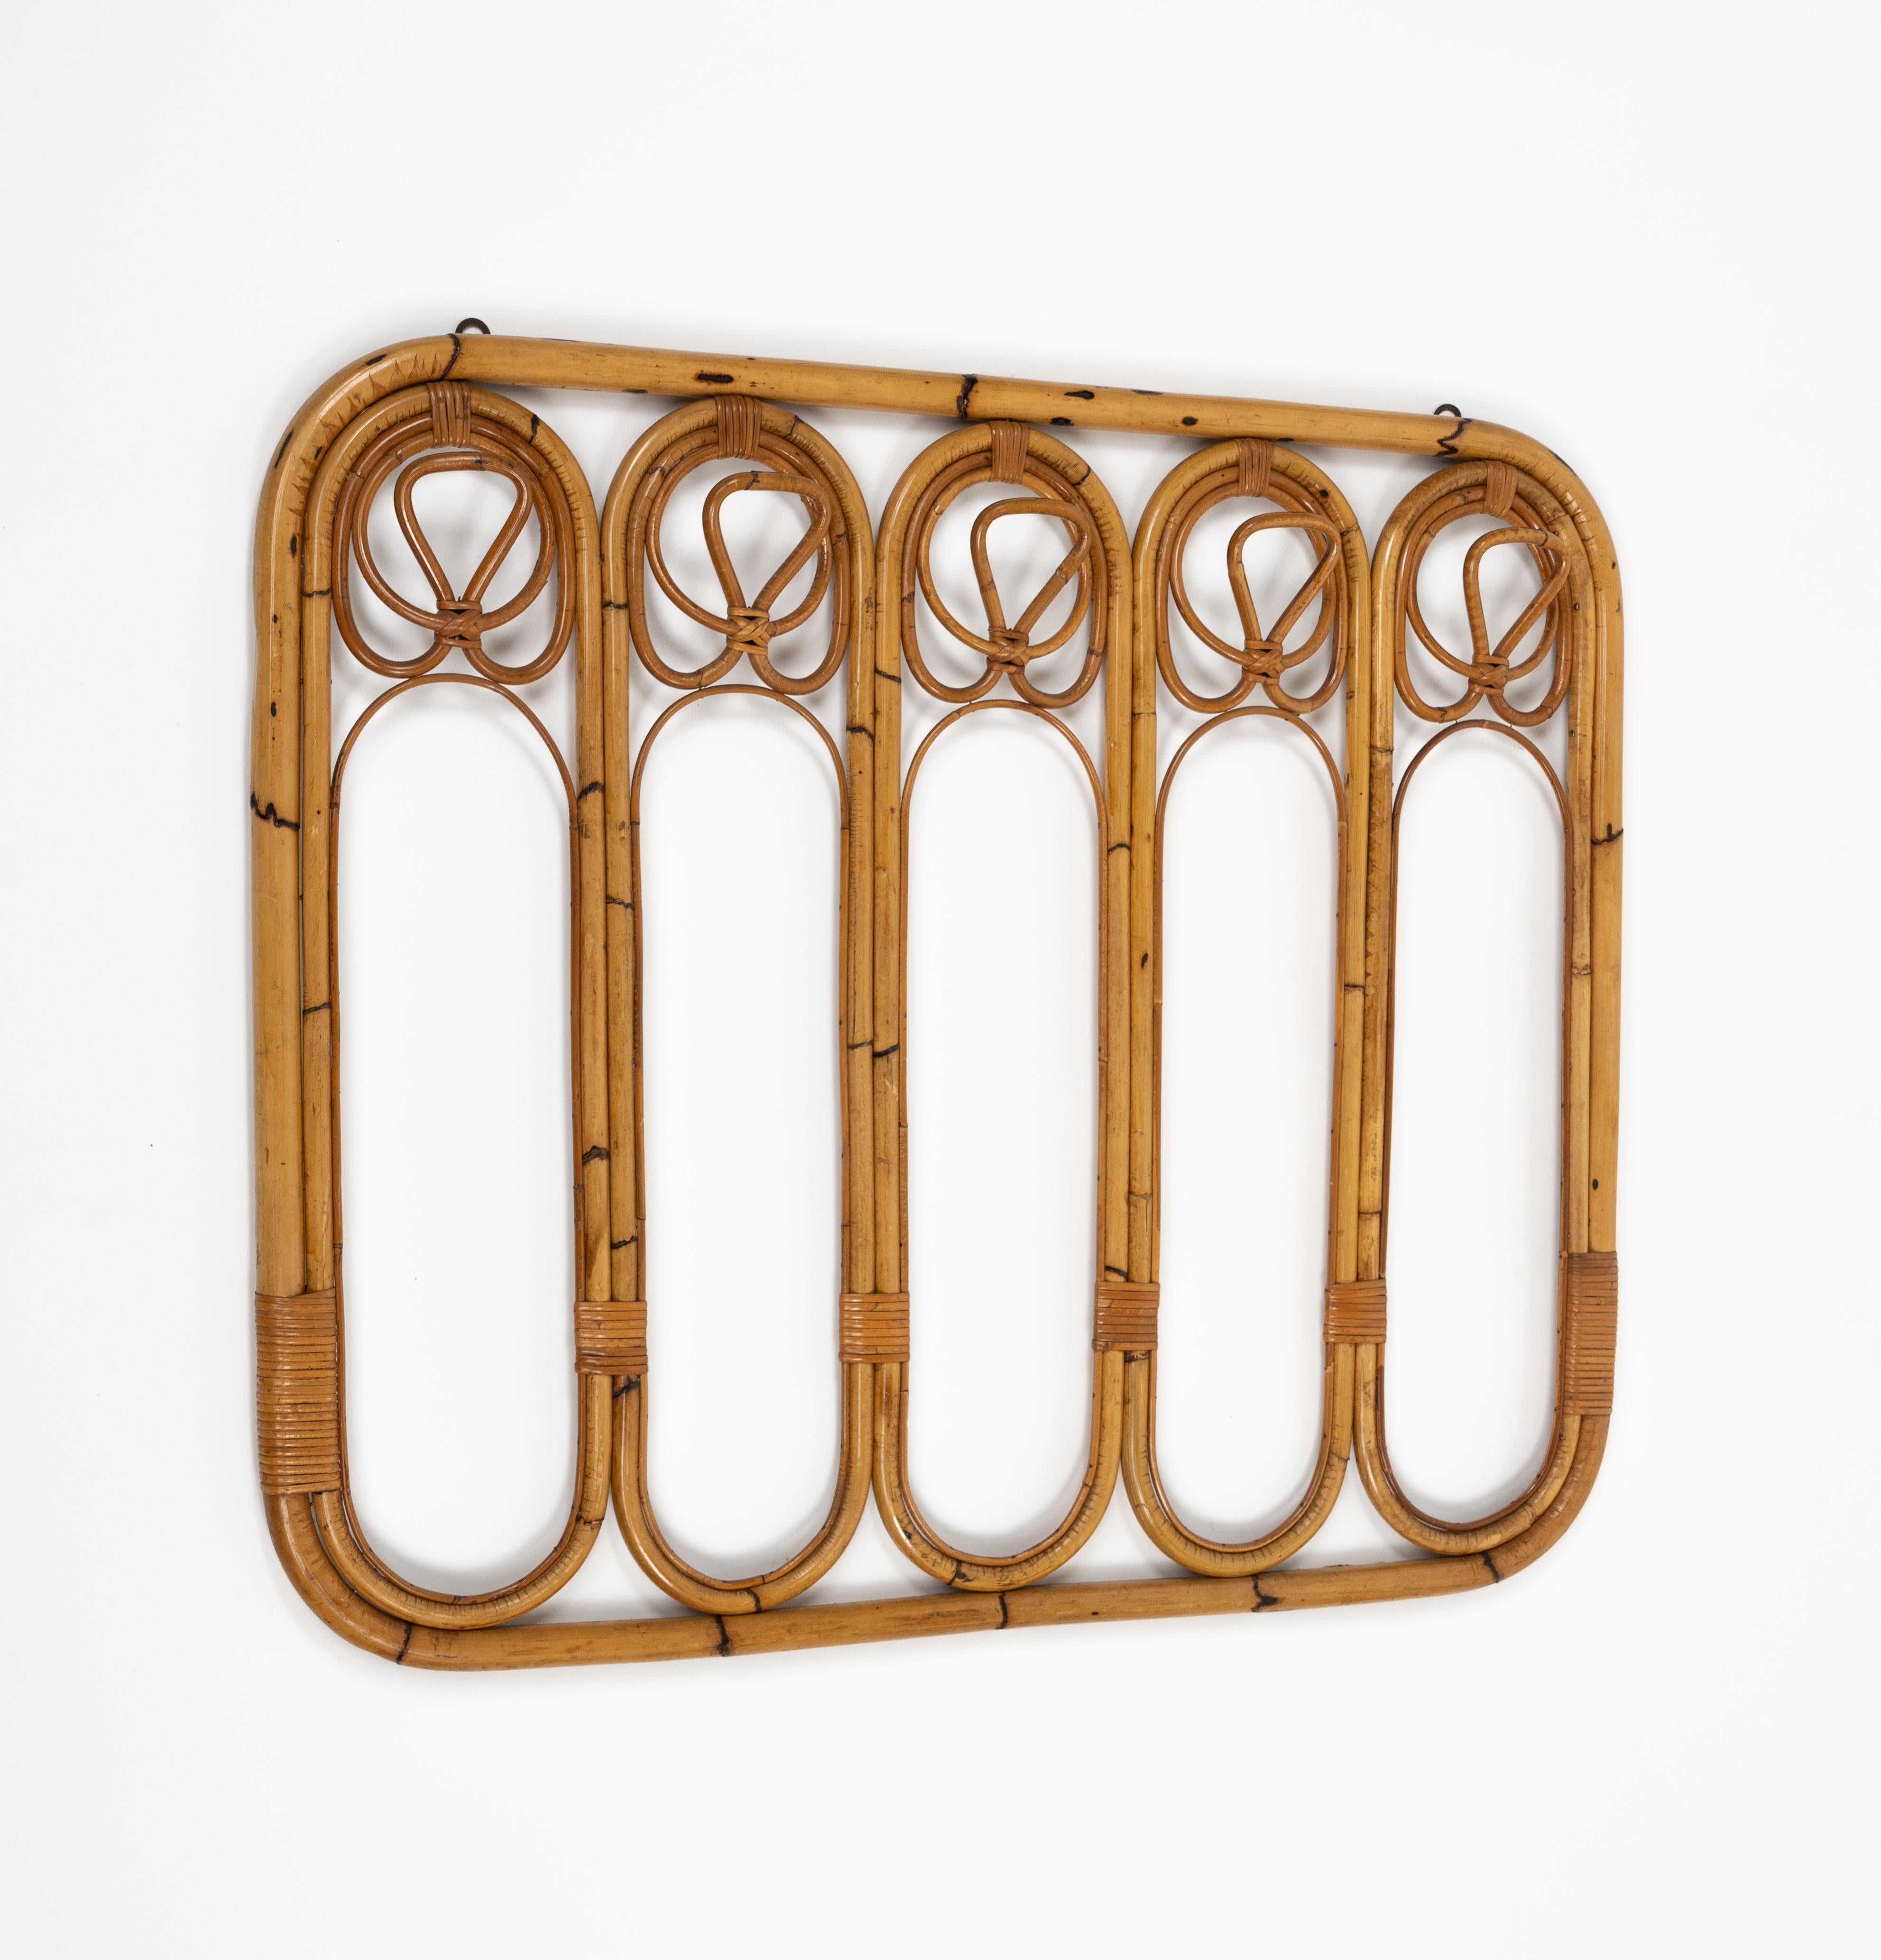 Midcentury Bamboo and Rattan Coat Rack Stand, Italy 1960s For Sale 2